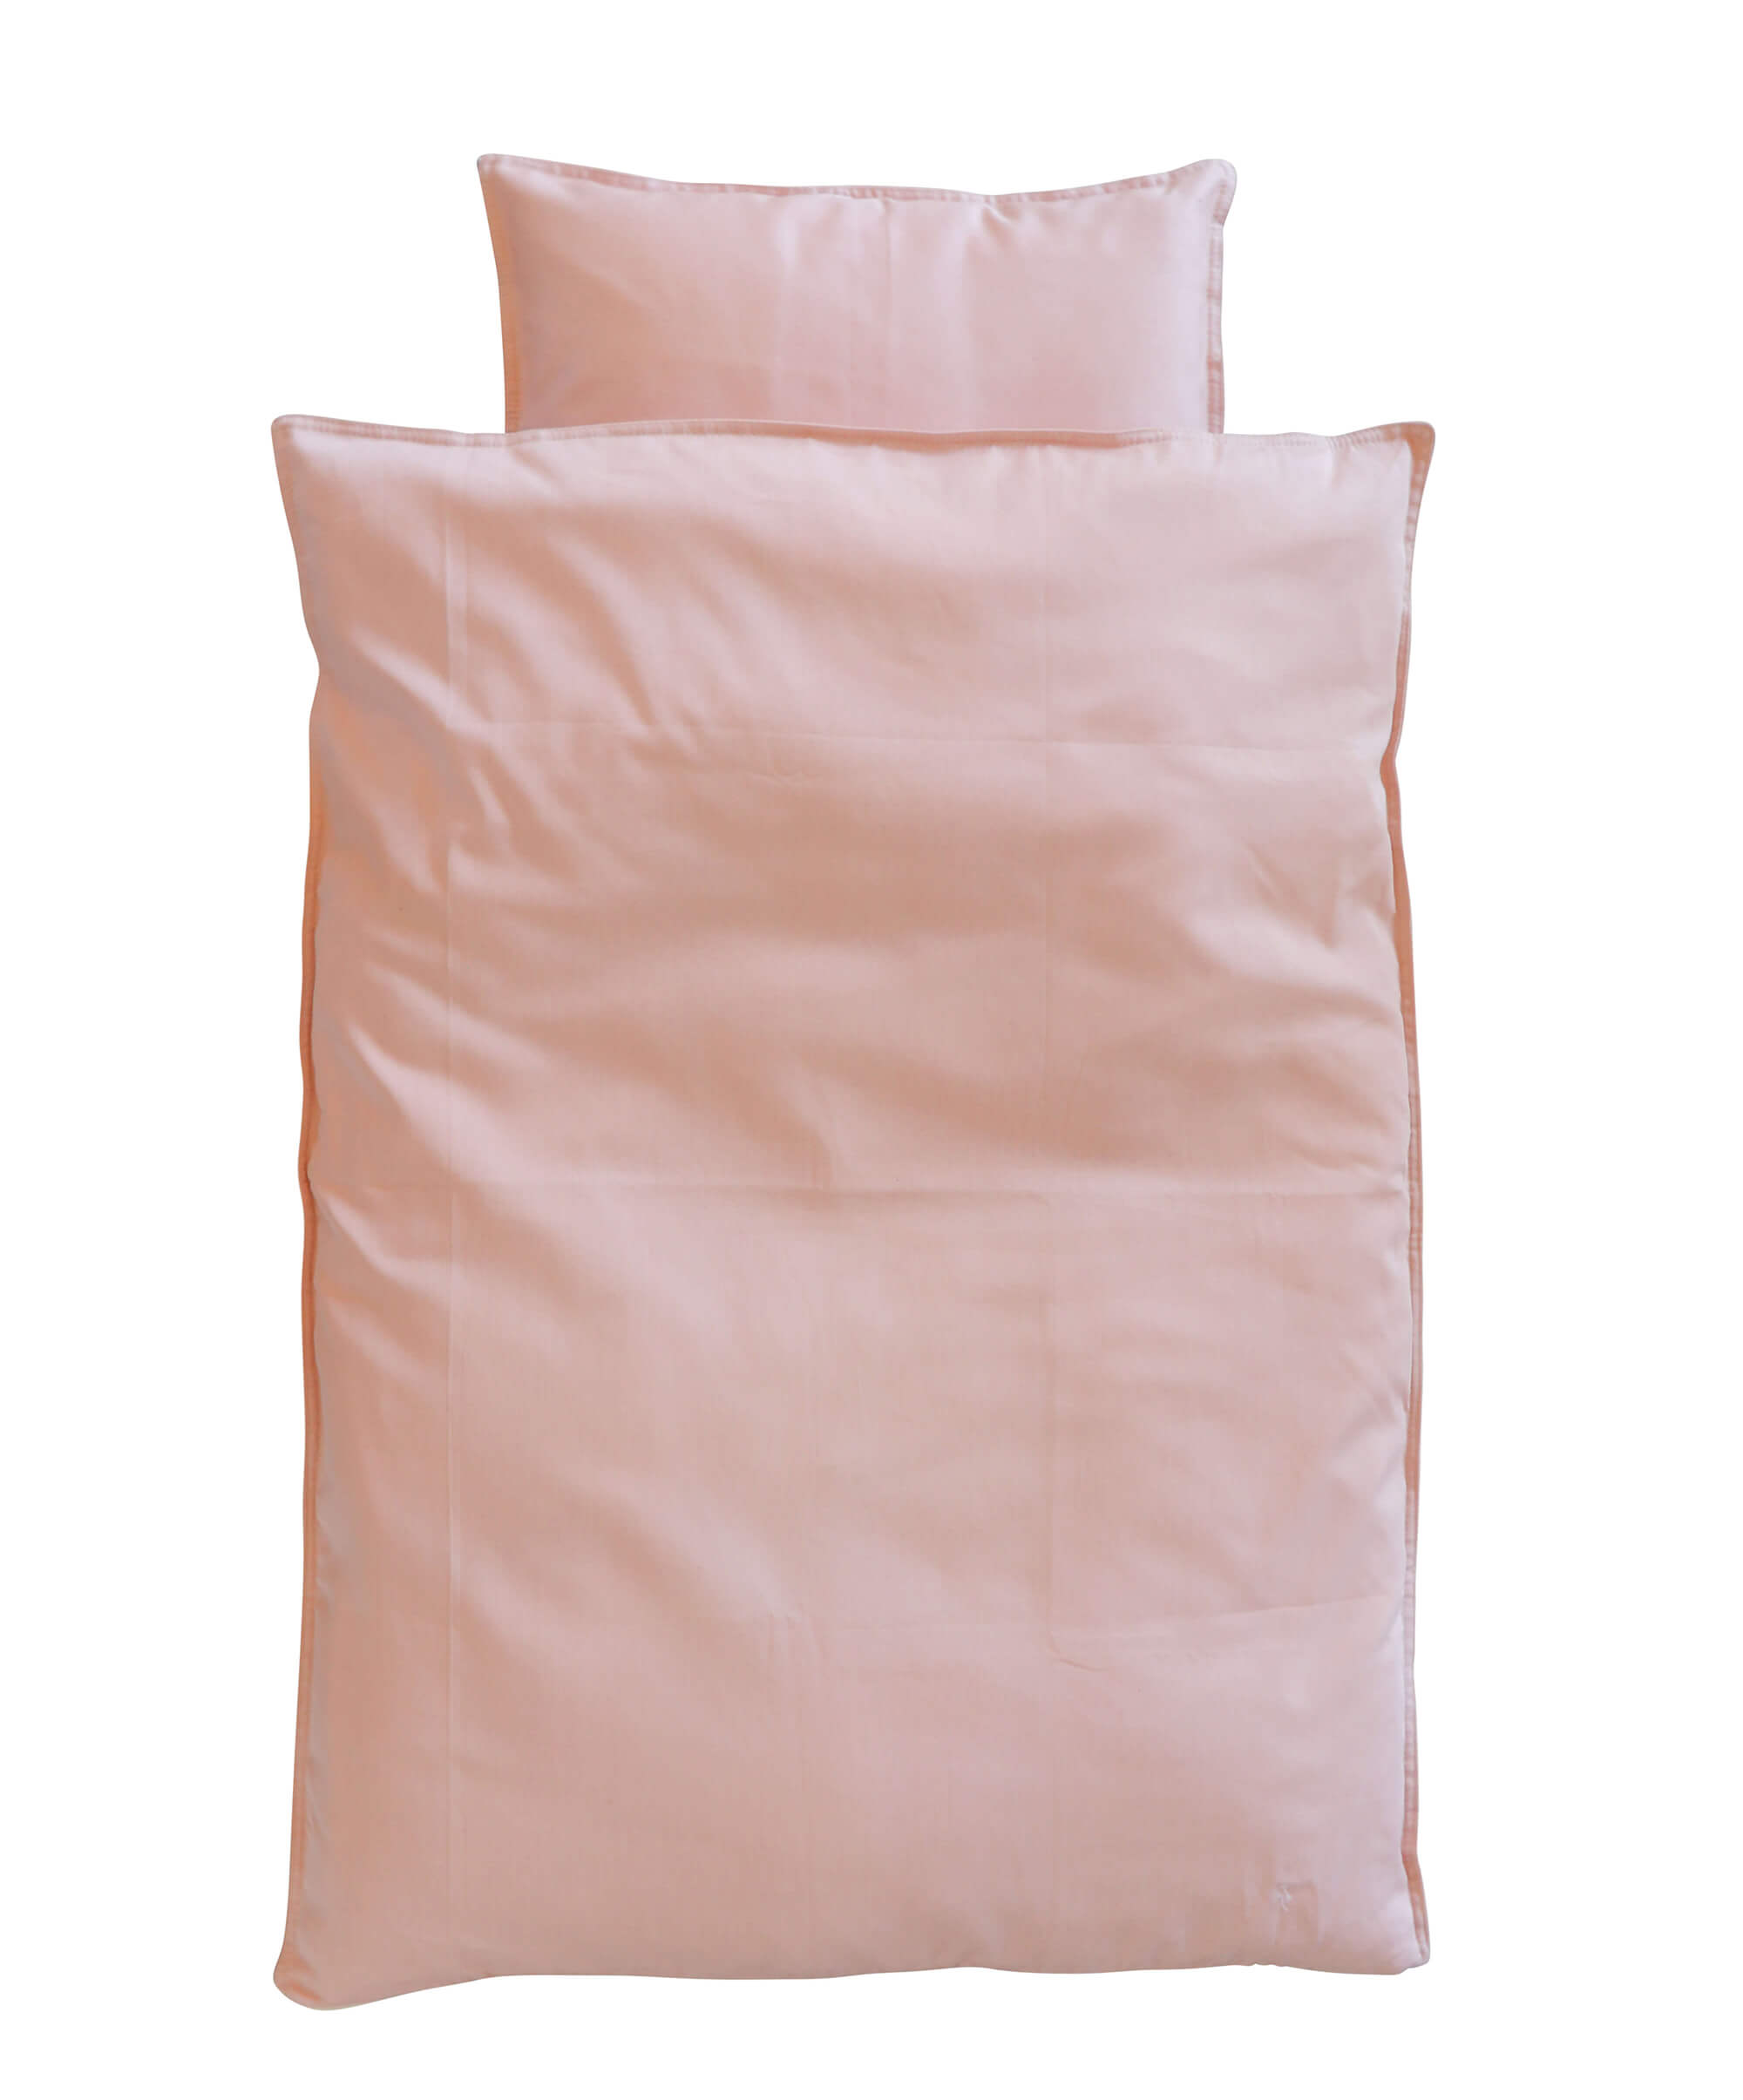 omhu - Percale baby bed linen 70x100 - Nude (100304007)